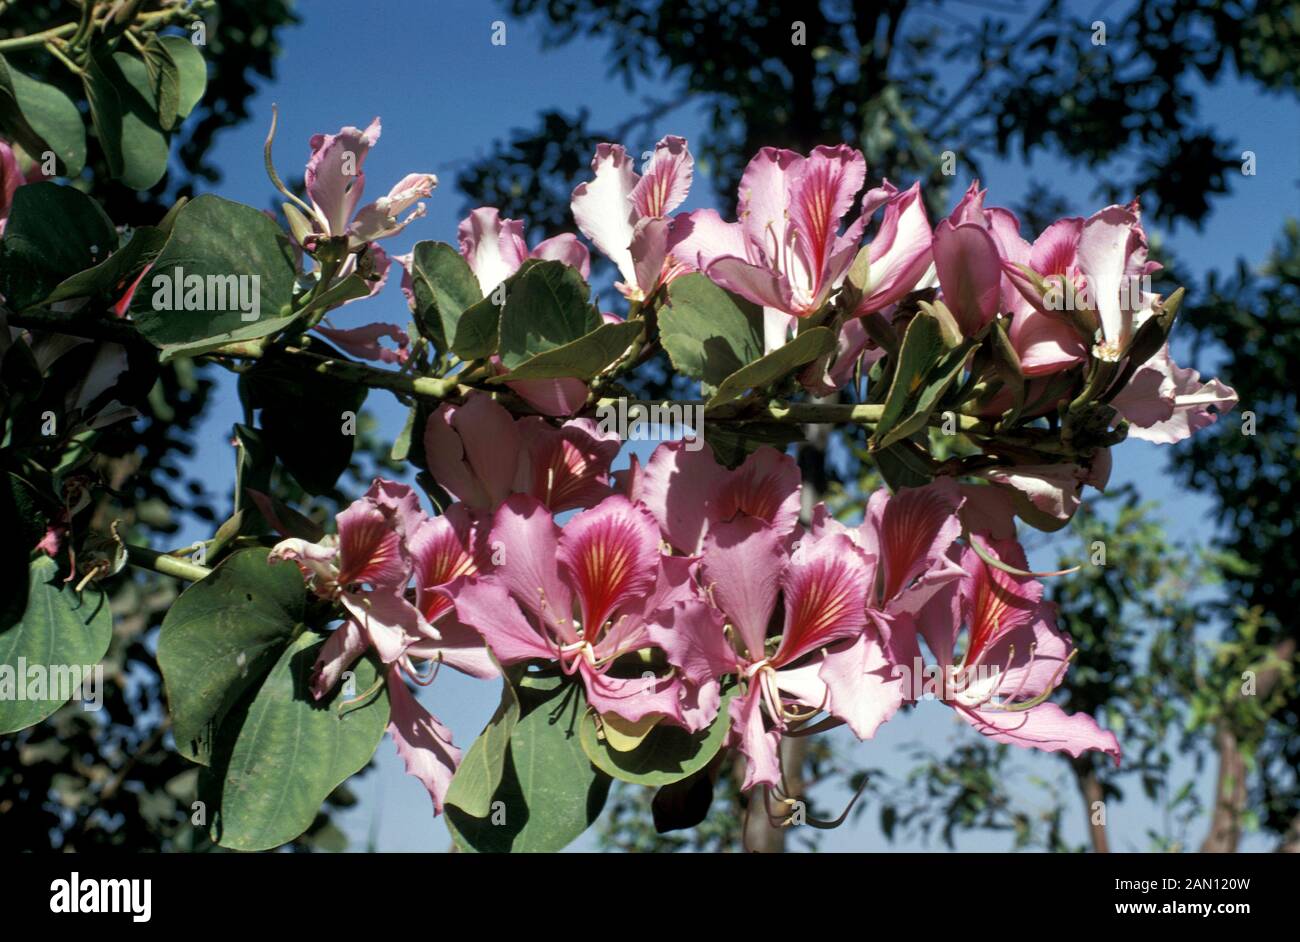 BAUHINIA ORCHID TREE WITH PINK FLOWERS ALONG THE BRANCHES AND BLUE SKY BEHIND. Stock Photo